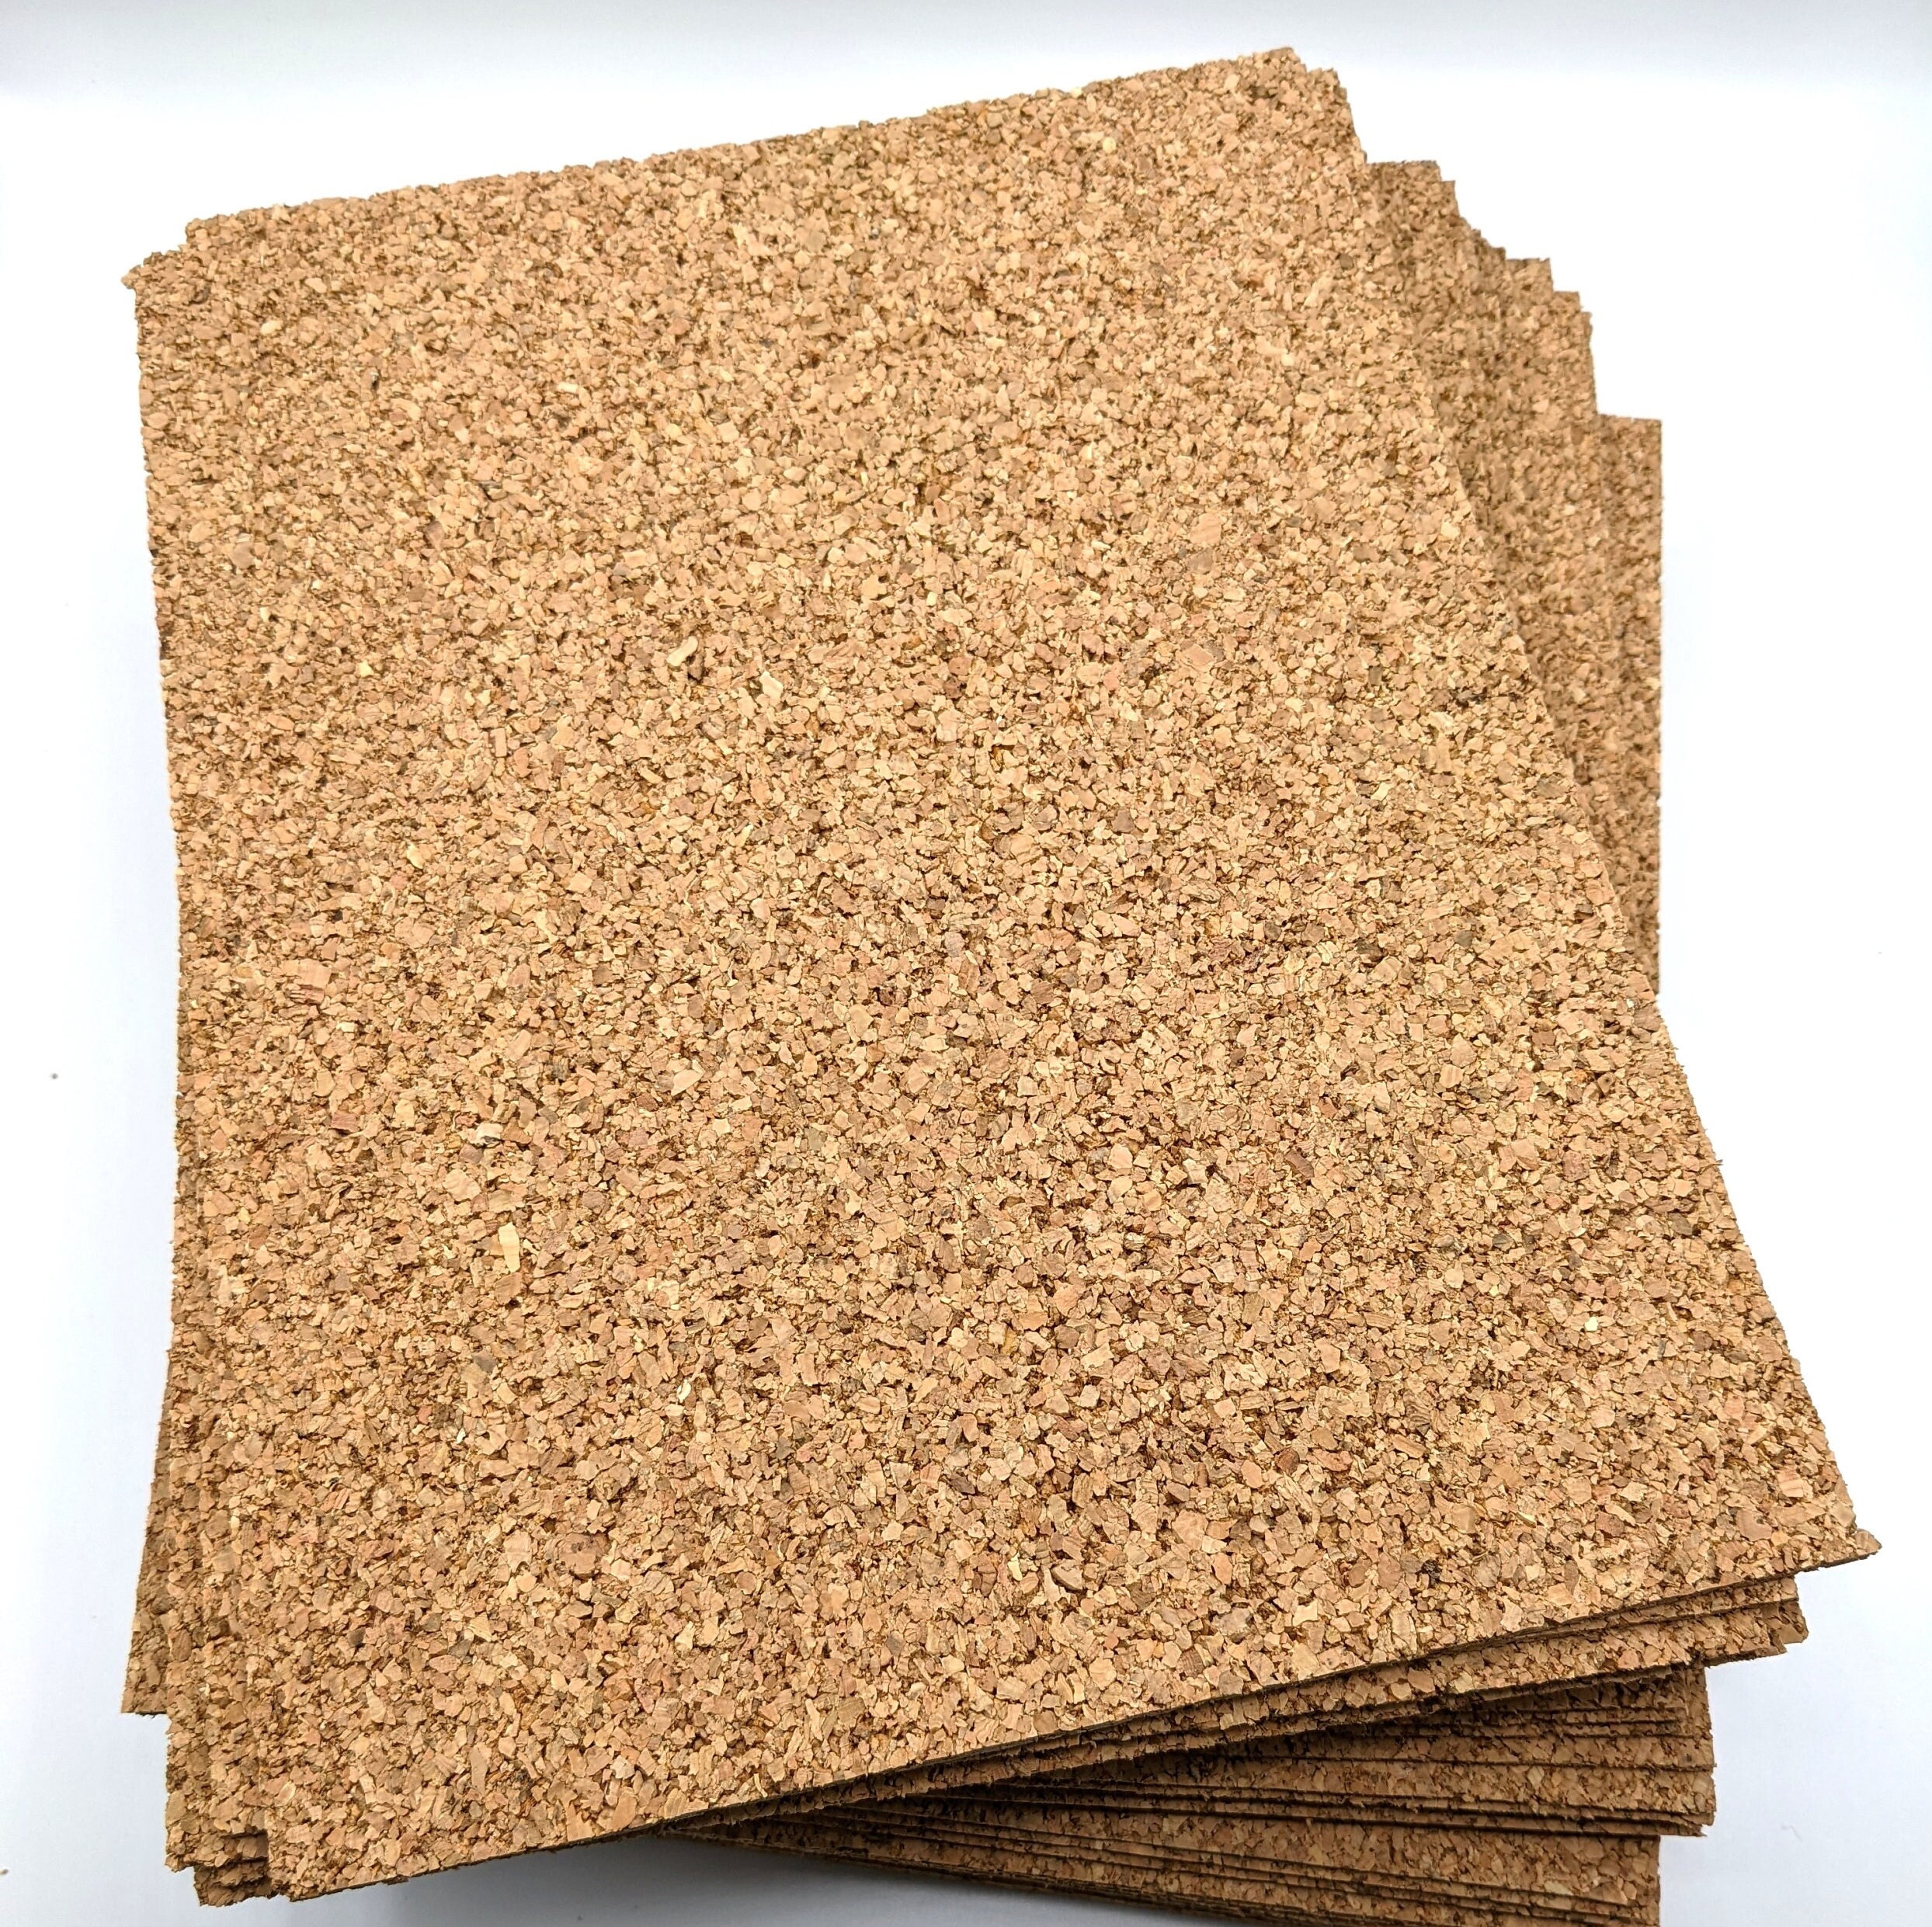 Thick Cork Board Etsy